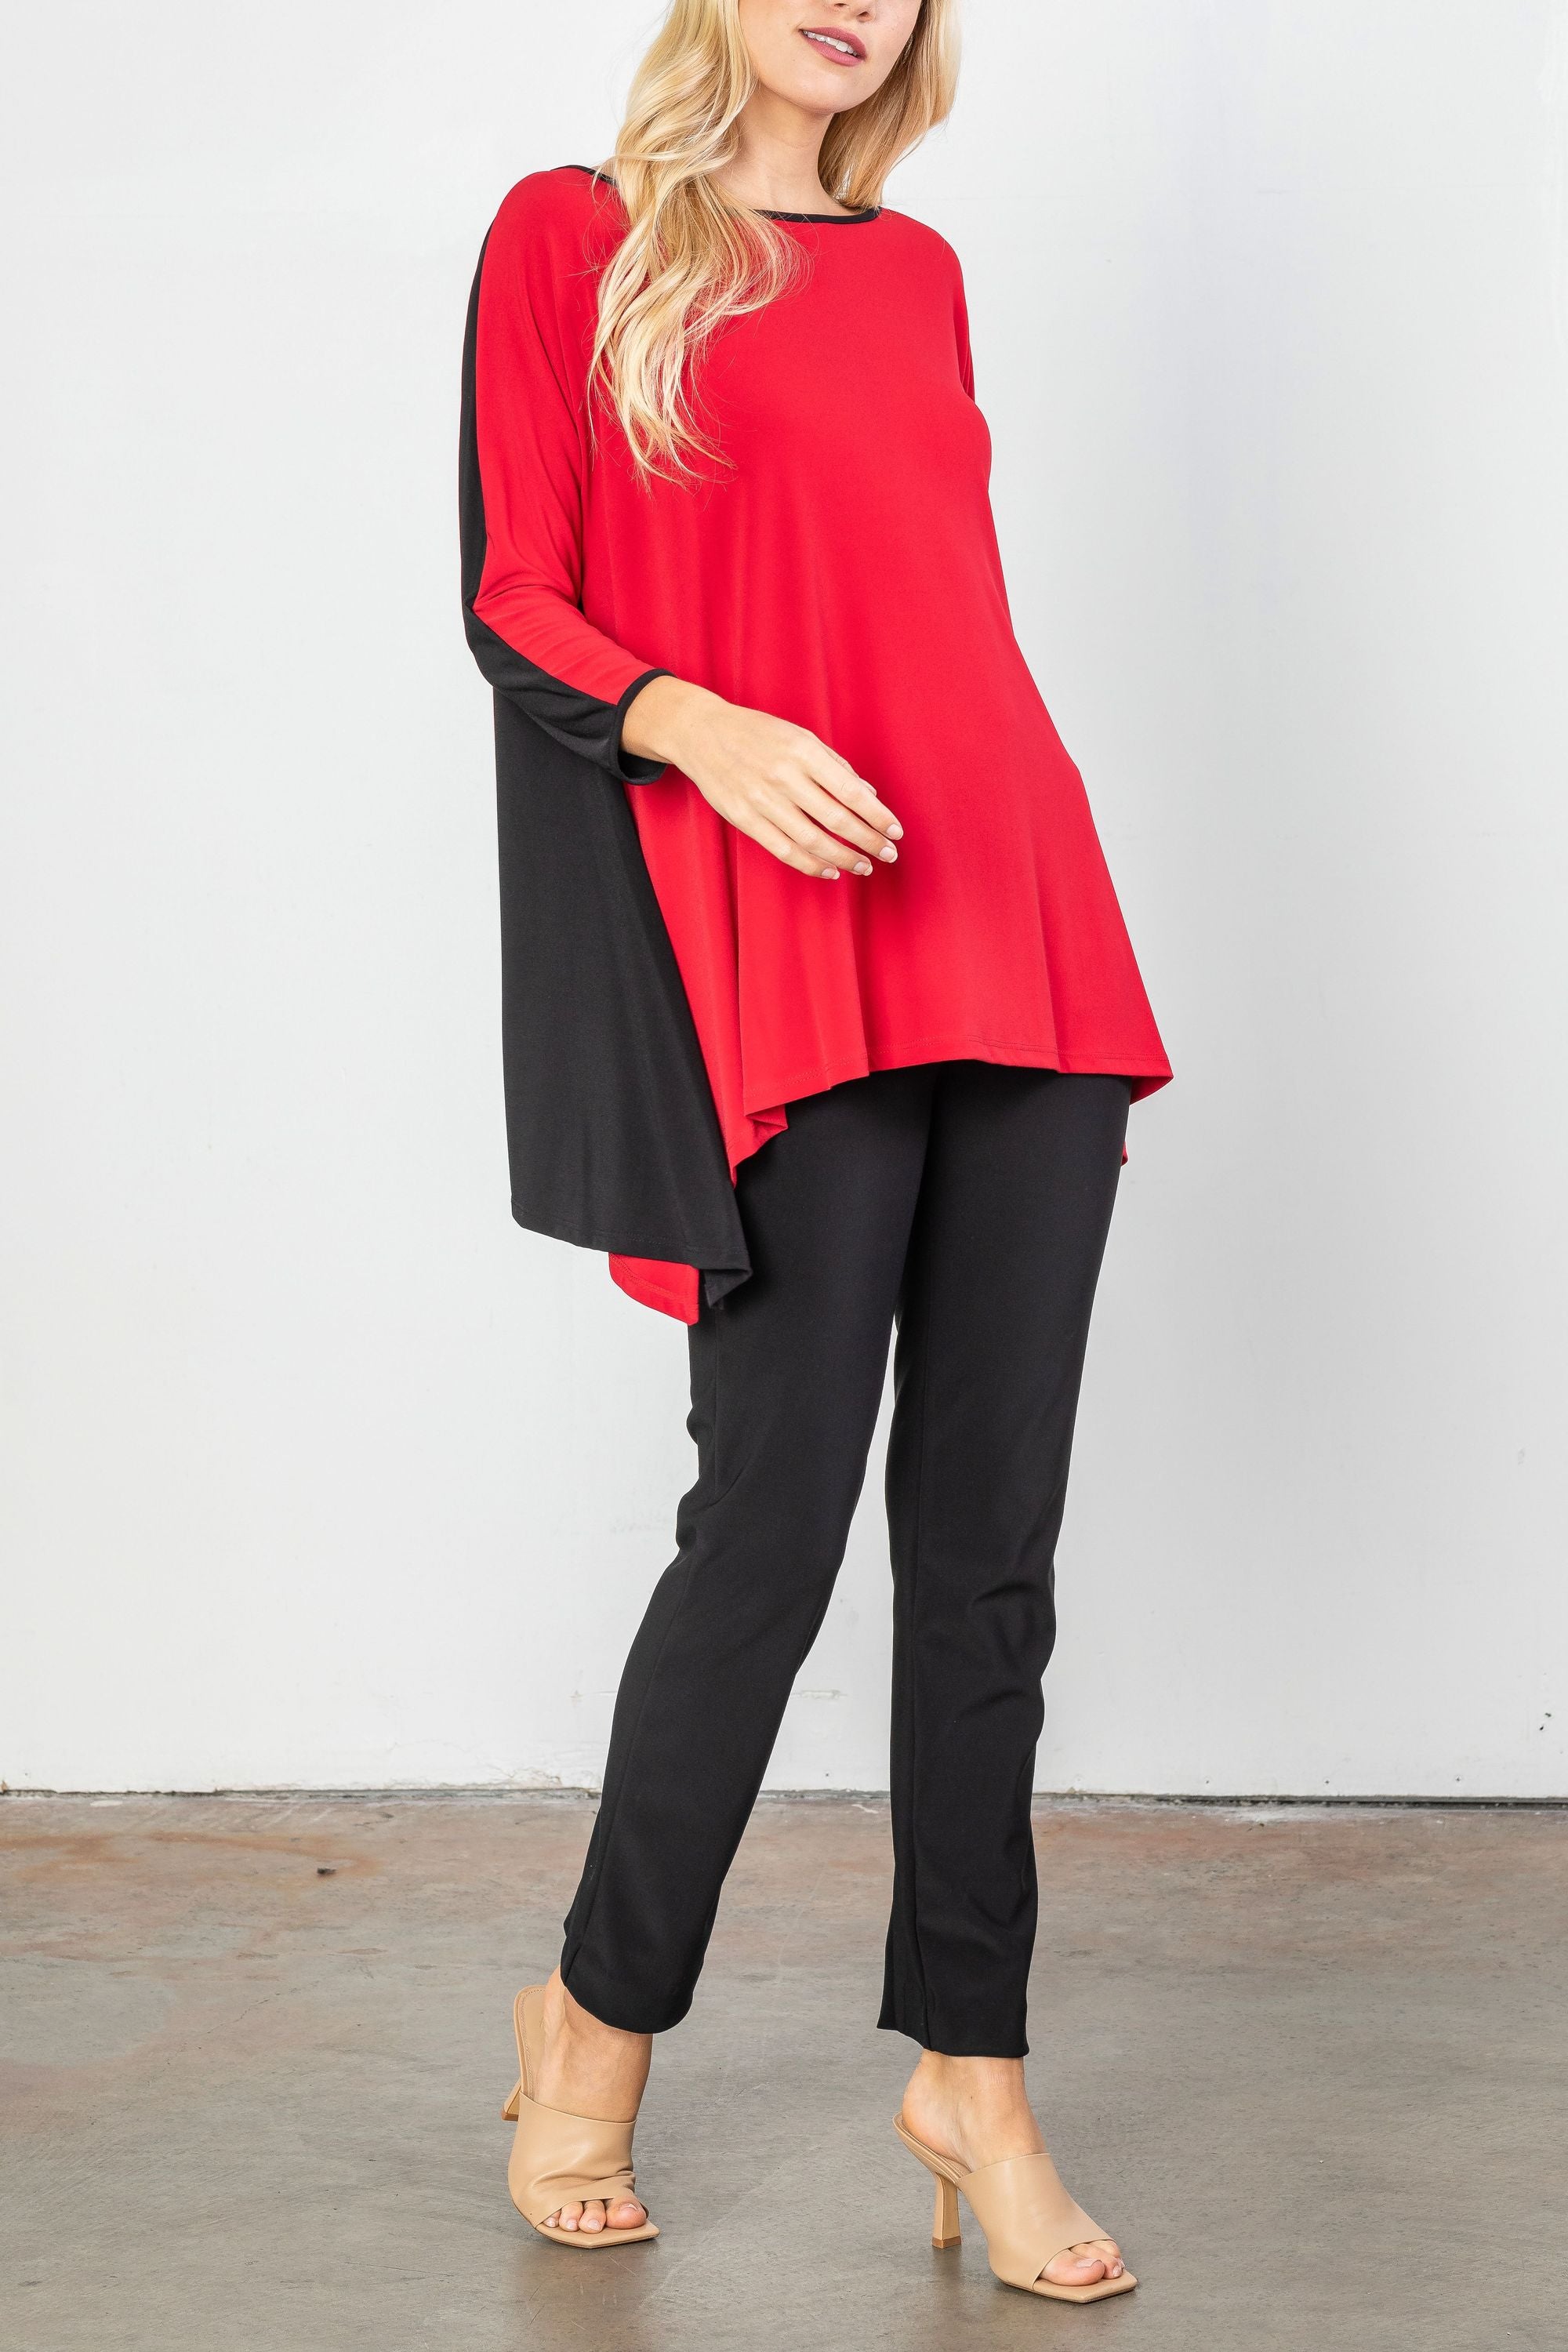 Red Front With Black Back Top